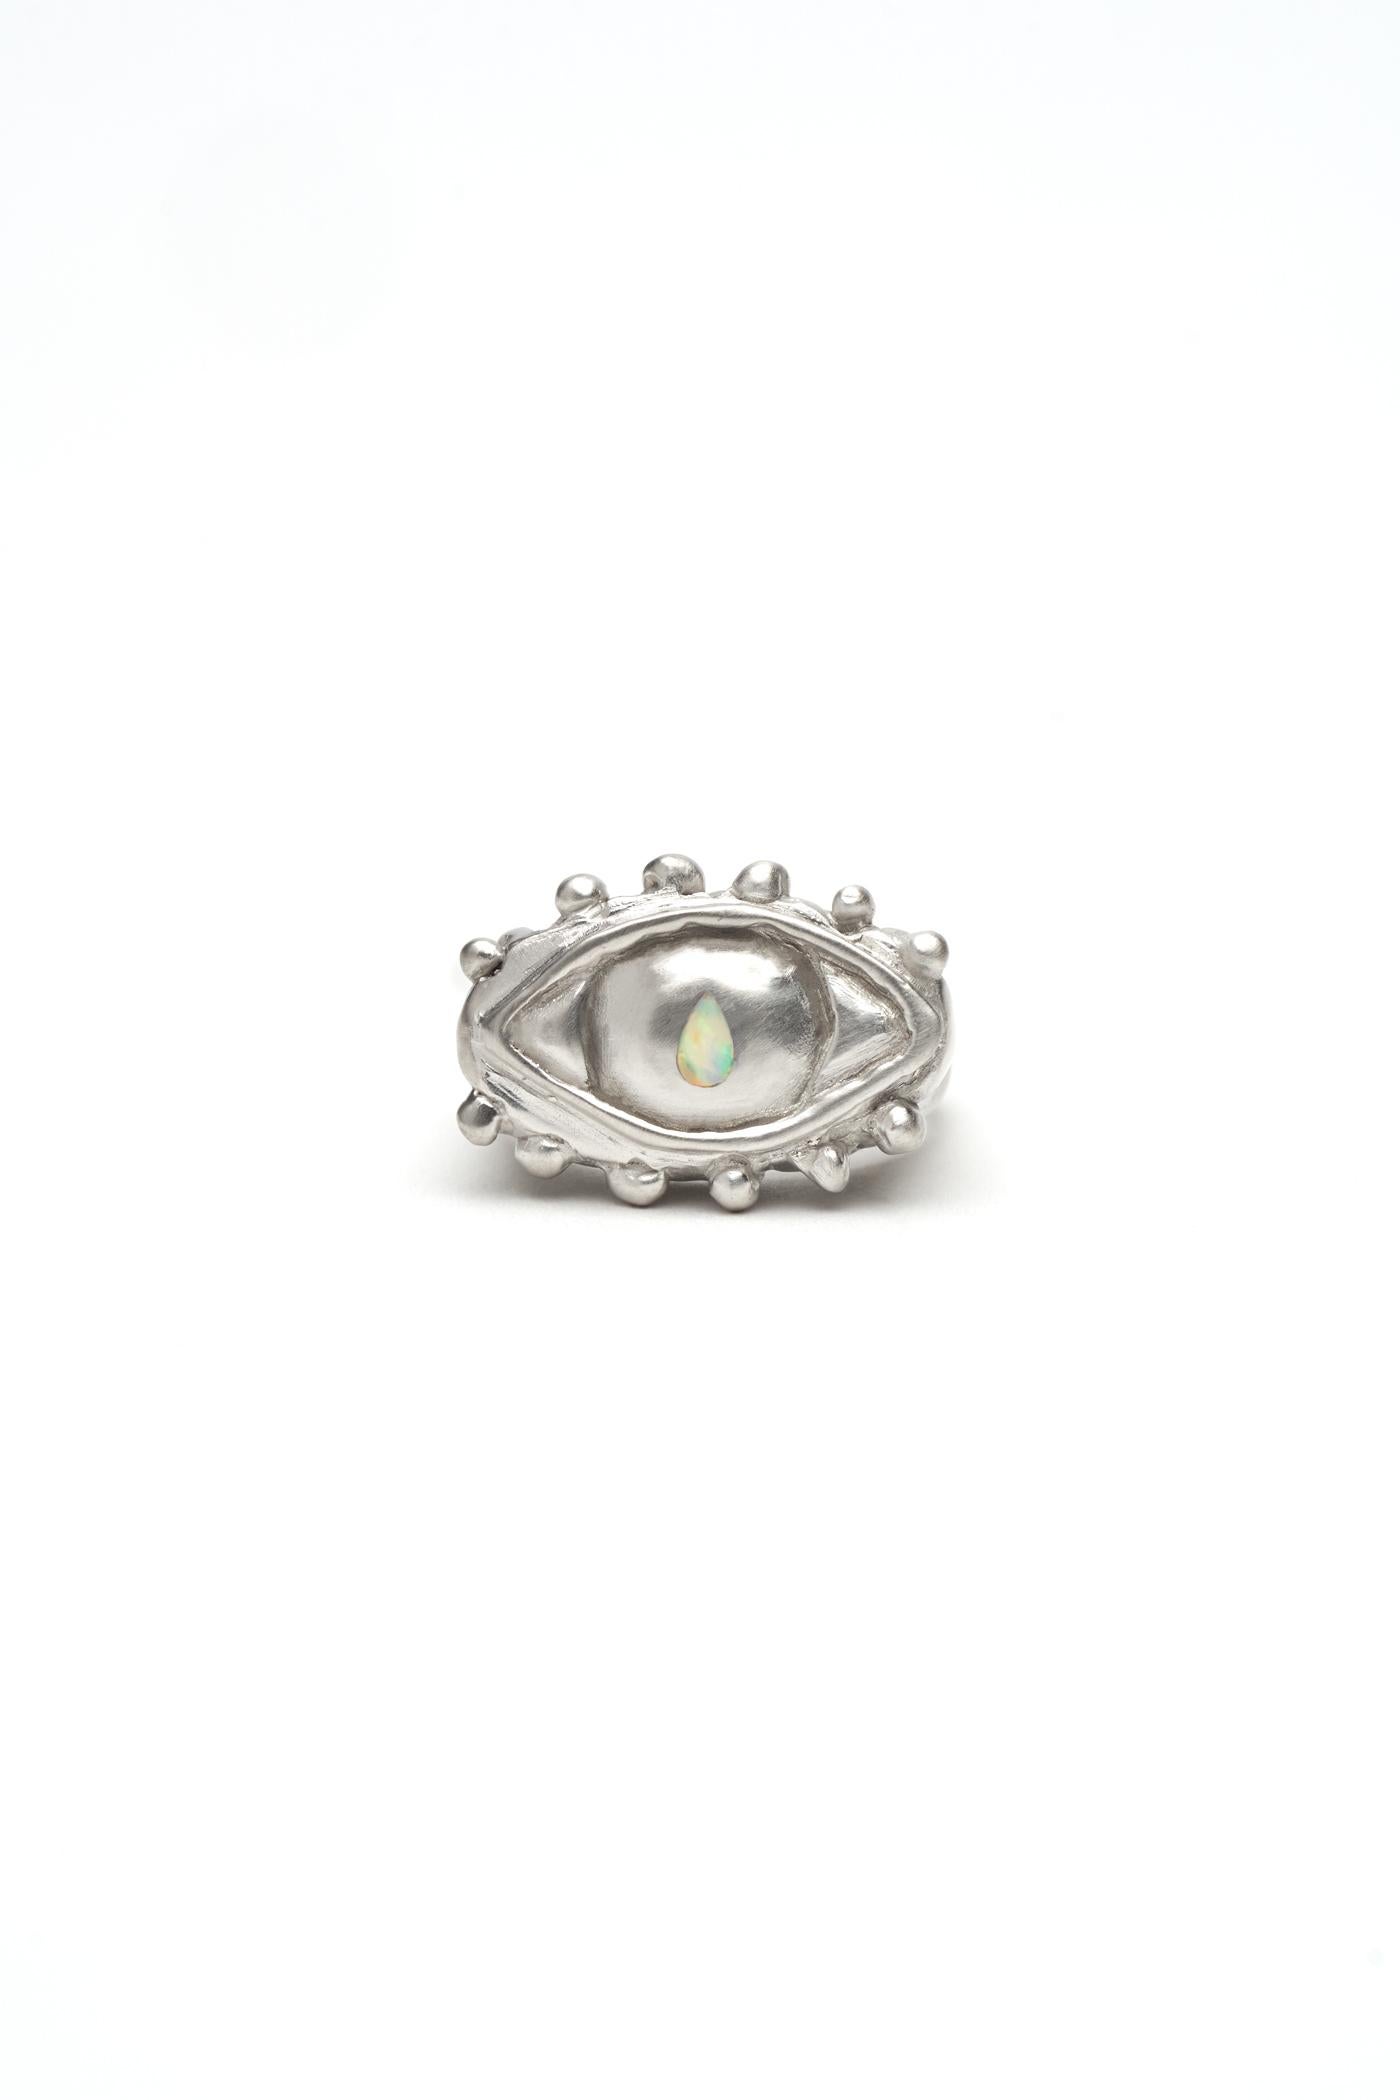 S A D É. x Wide Awakes Mati Ring in 14 Karat Yellow or White Gold For Sale 1